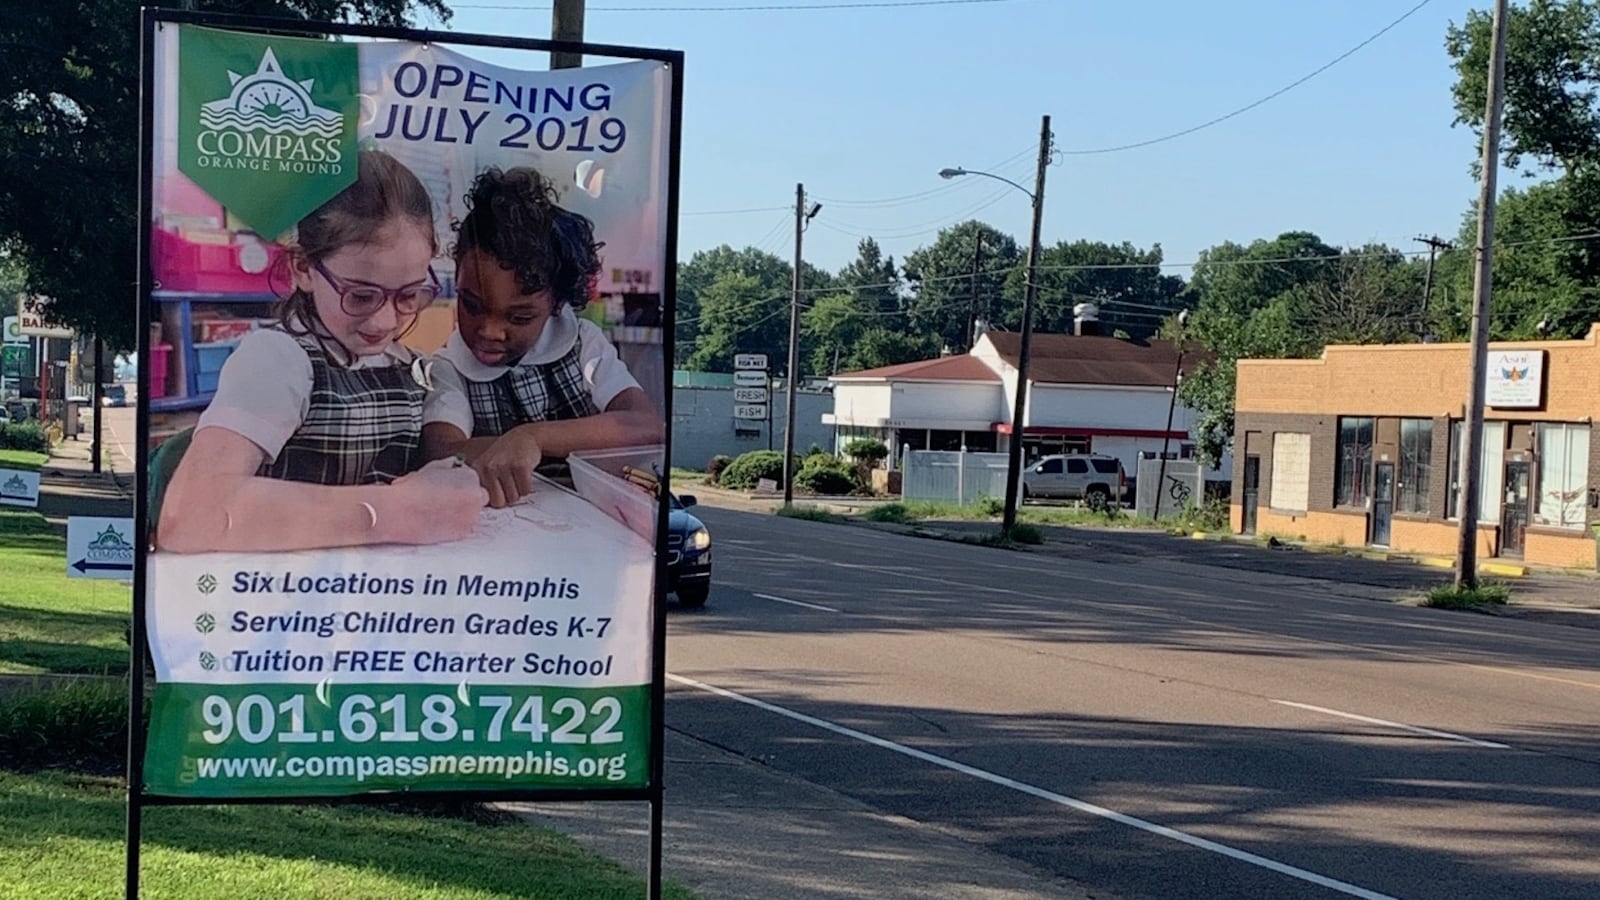 Compass Community Schools - Orange Mound opened in 2019 as one of six in the new charter school network of former private Catholic schools.